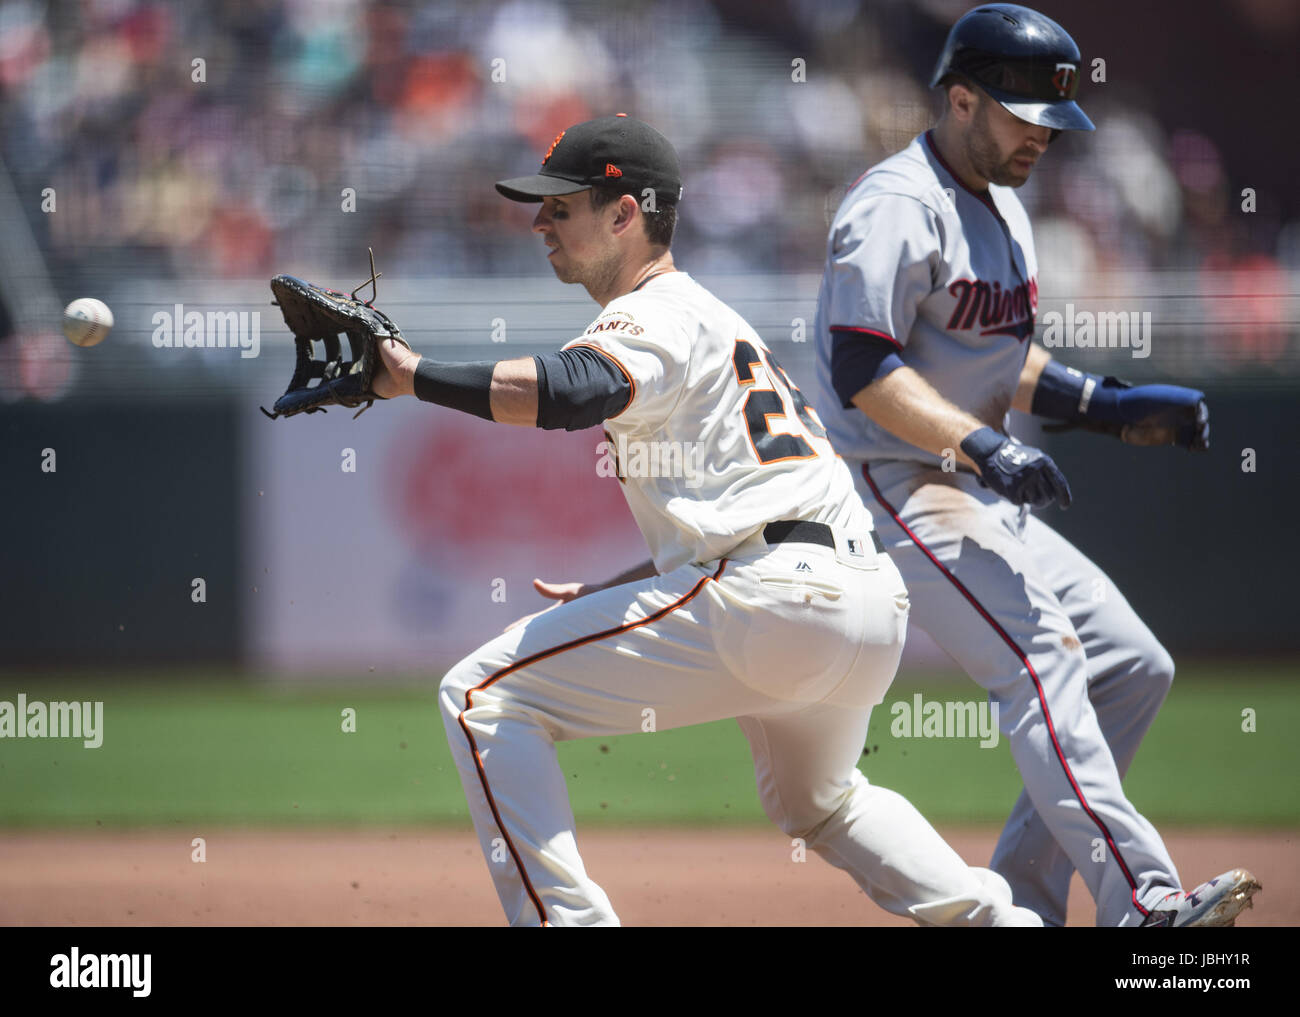 San Francisco, California, USA. 11th June, 2017. San Francisco Giants catcher Buster Posey (28) keeping Minnesota Twins second baseman Brian Dozier (2) on the bag in the first inning during a MLB baseball game between the Minnesota Twins and the San Francisco Giants on ''Dog Days of Summer'' at AT&T Park in San Francisco, California. Valerie Shoaps/CSM/Alamy Live News Stock Photo